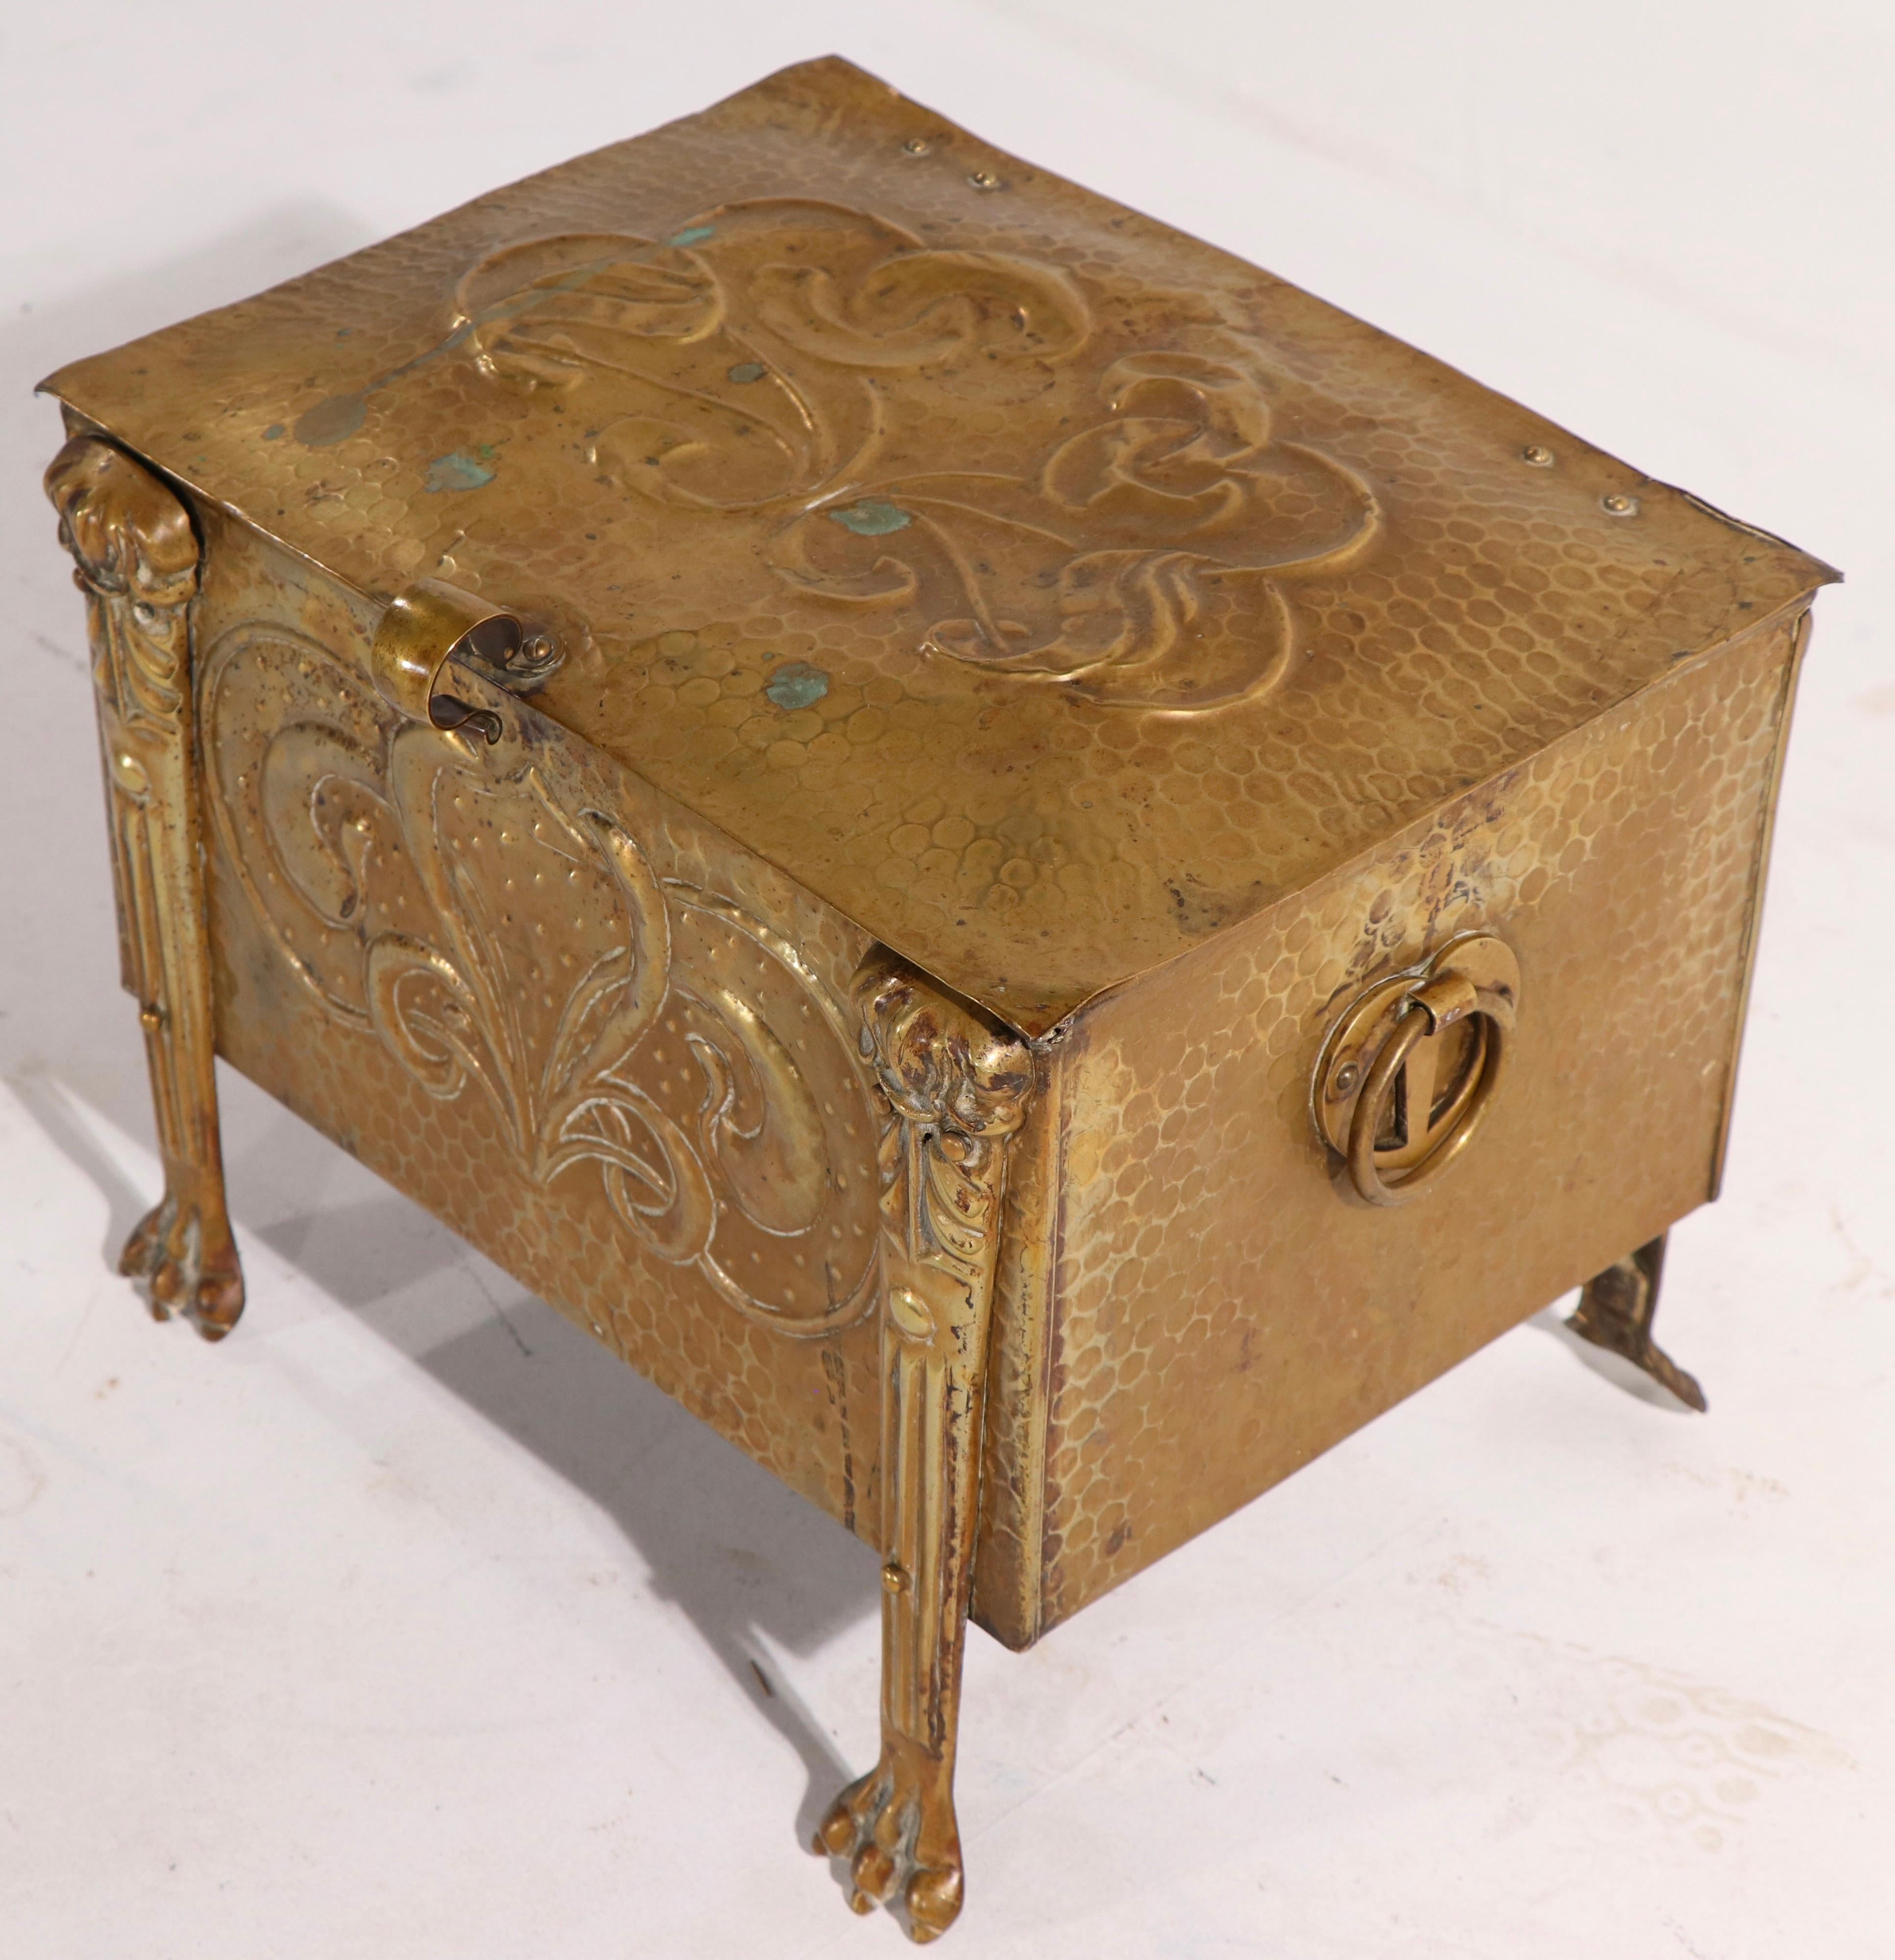 English 19th C Art Nouveau Arts and Crafts Coal Wood Box in Repousse Brass